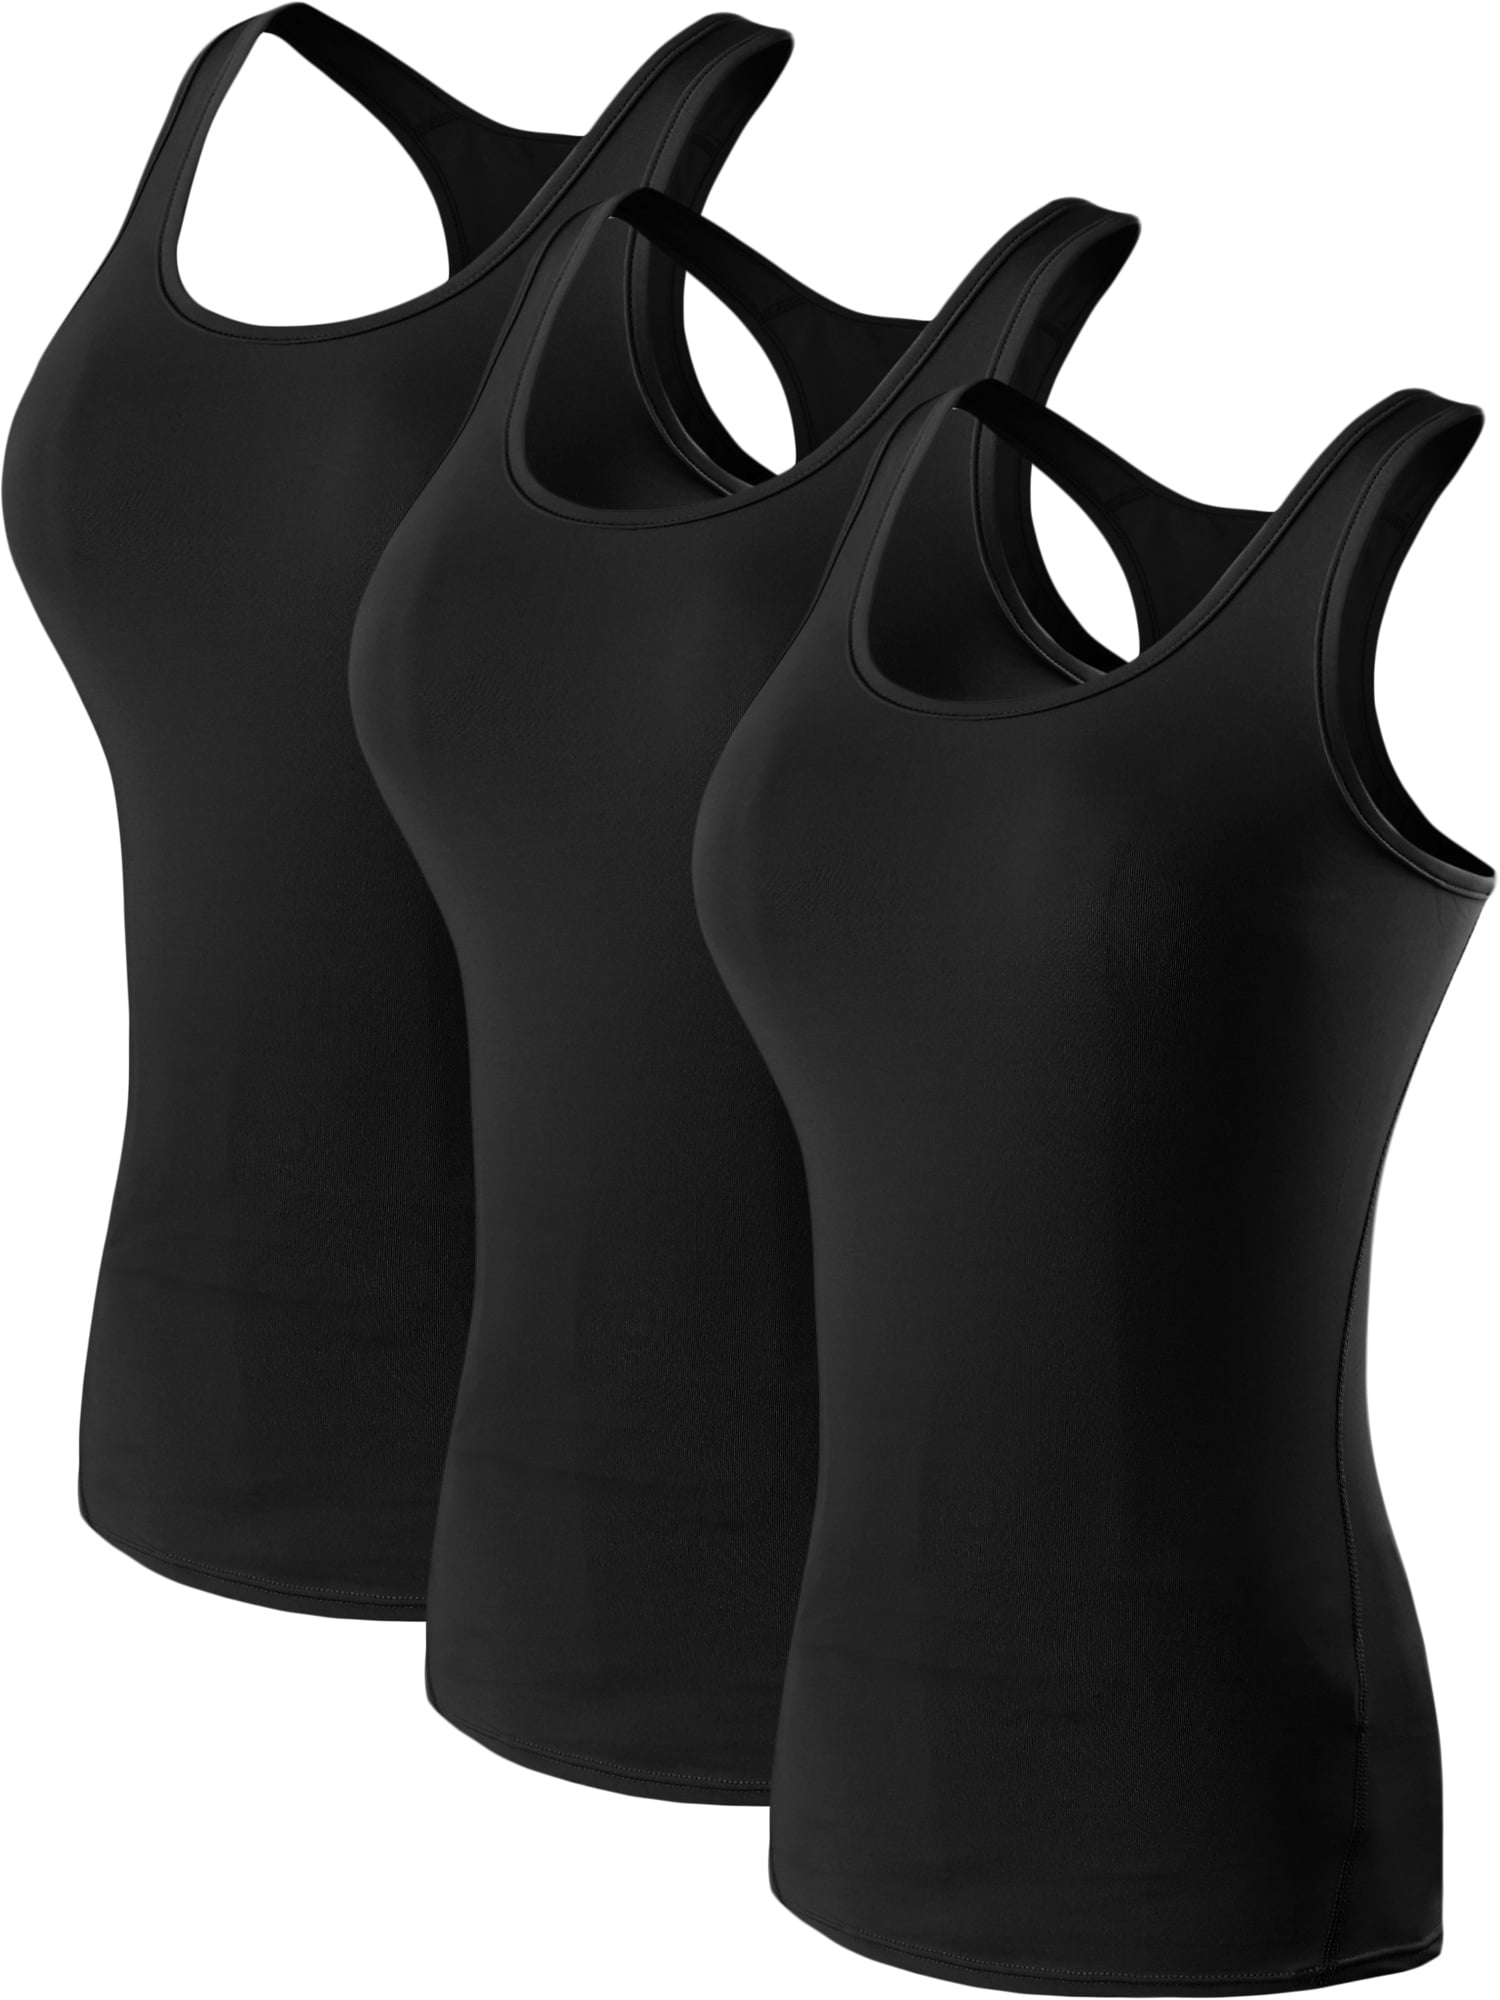 NELEUS Womens Compression Base Layer Dry Fit Tank Top 3  Pack,Black+Gray+White,US Size XS